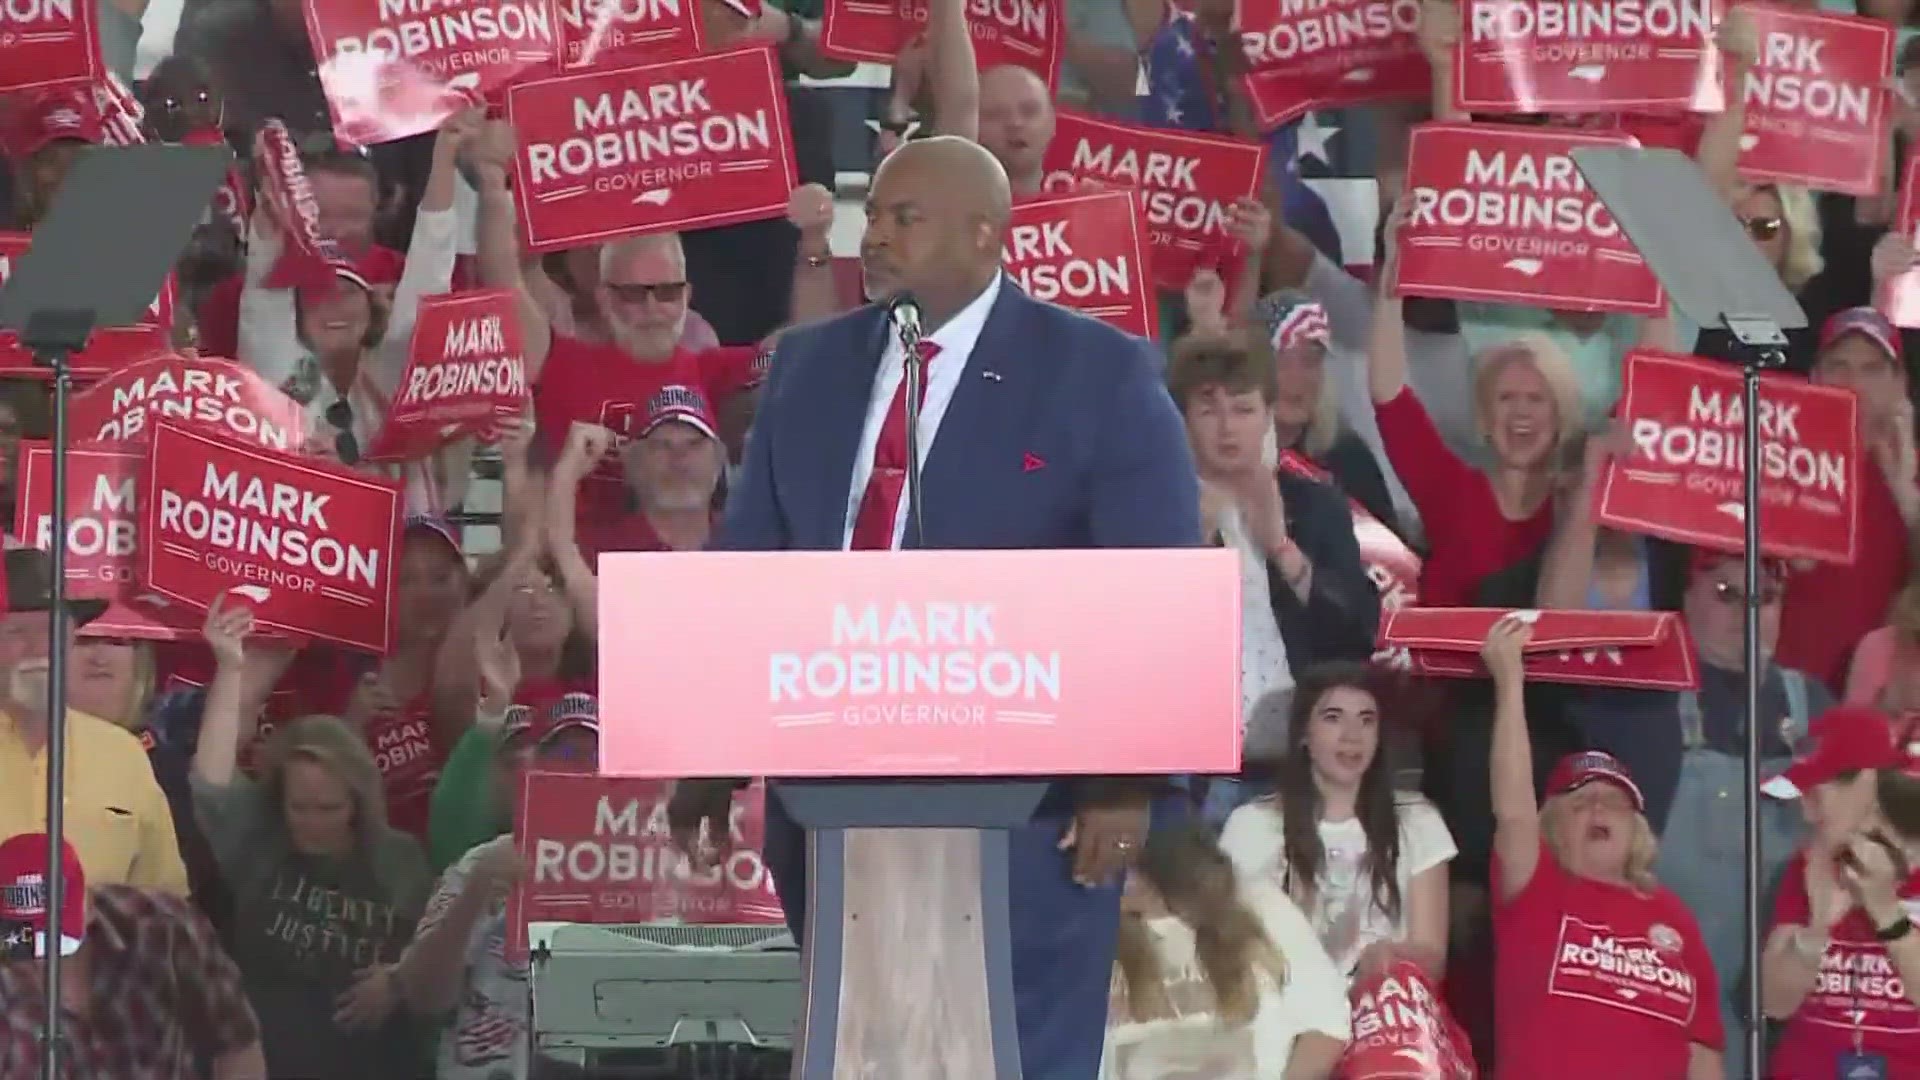 Robinson called the survivors of the Parkland shooting "spoiled, angry and know-it-all children."